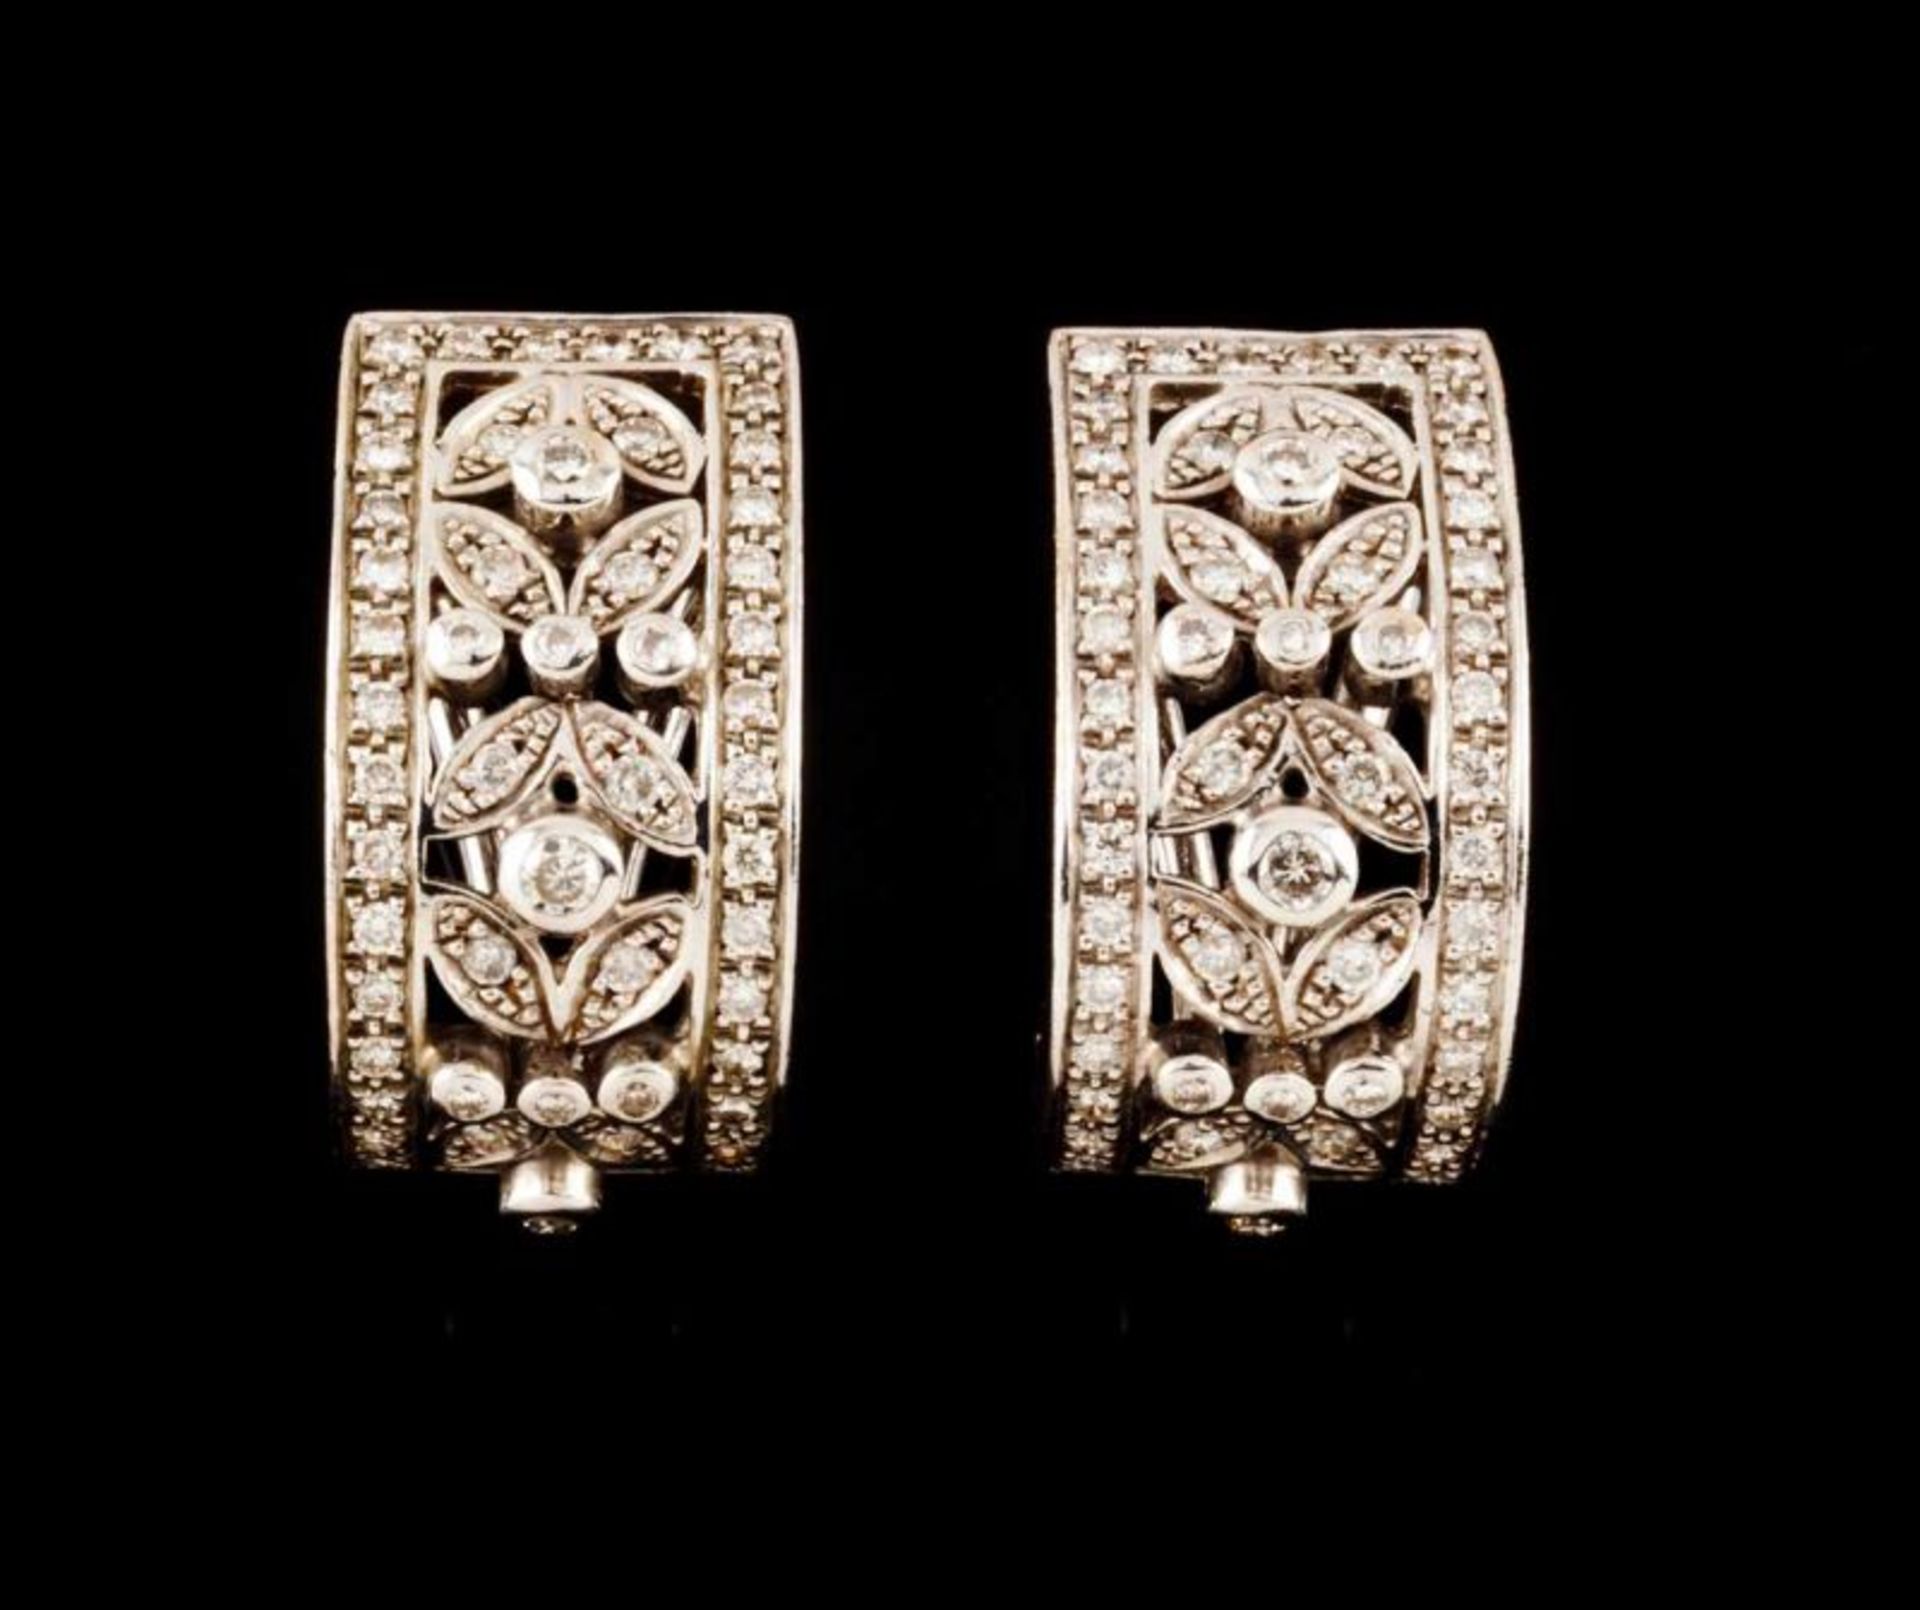 A pair of earrings Set in white gold with 106 small brilliant cut diamonds (ca. 0,50ct) Assay